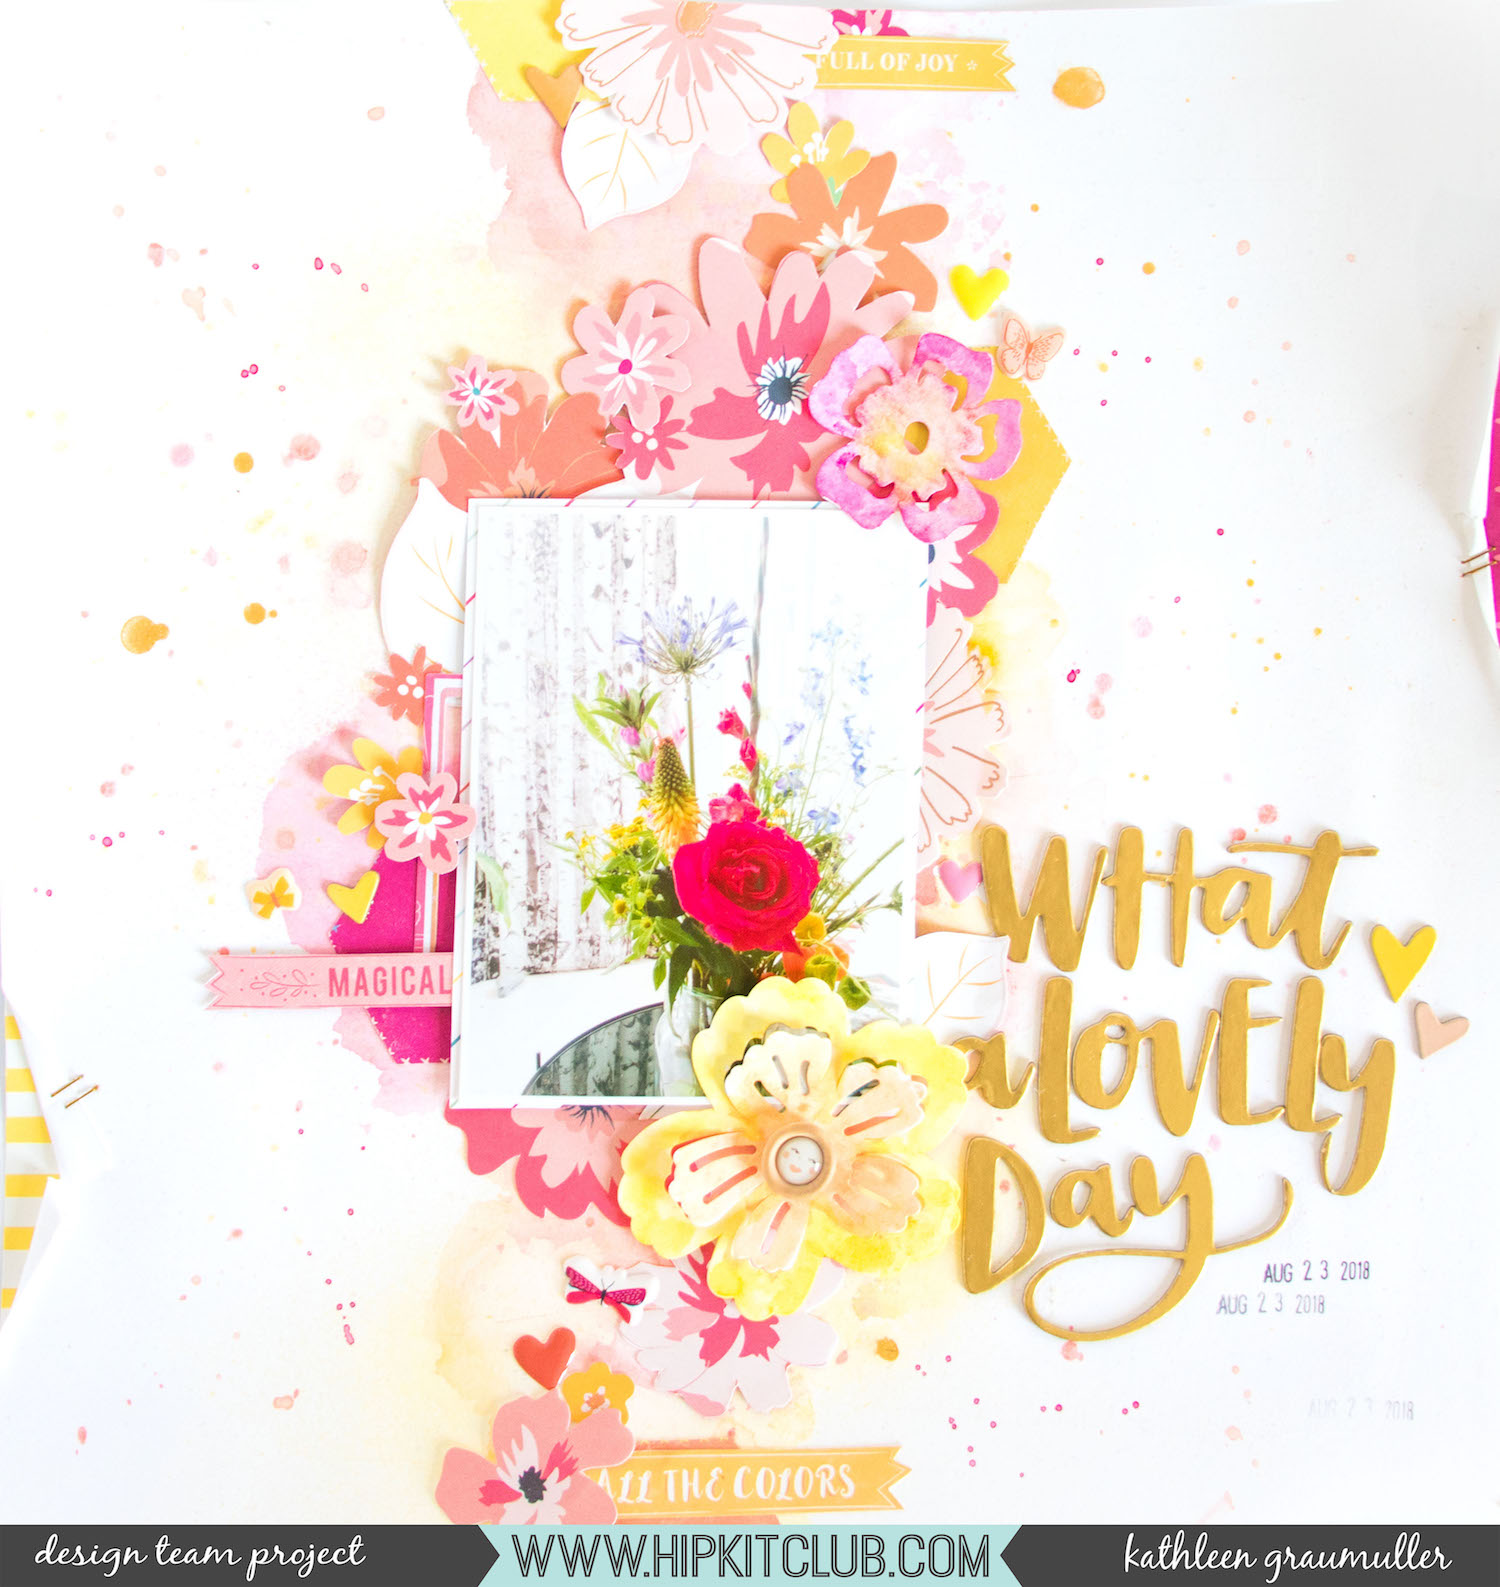 Lovely Day by ScatteredConfetti. // #scrapbooking #hipkitclub #pinkpaislee